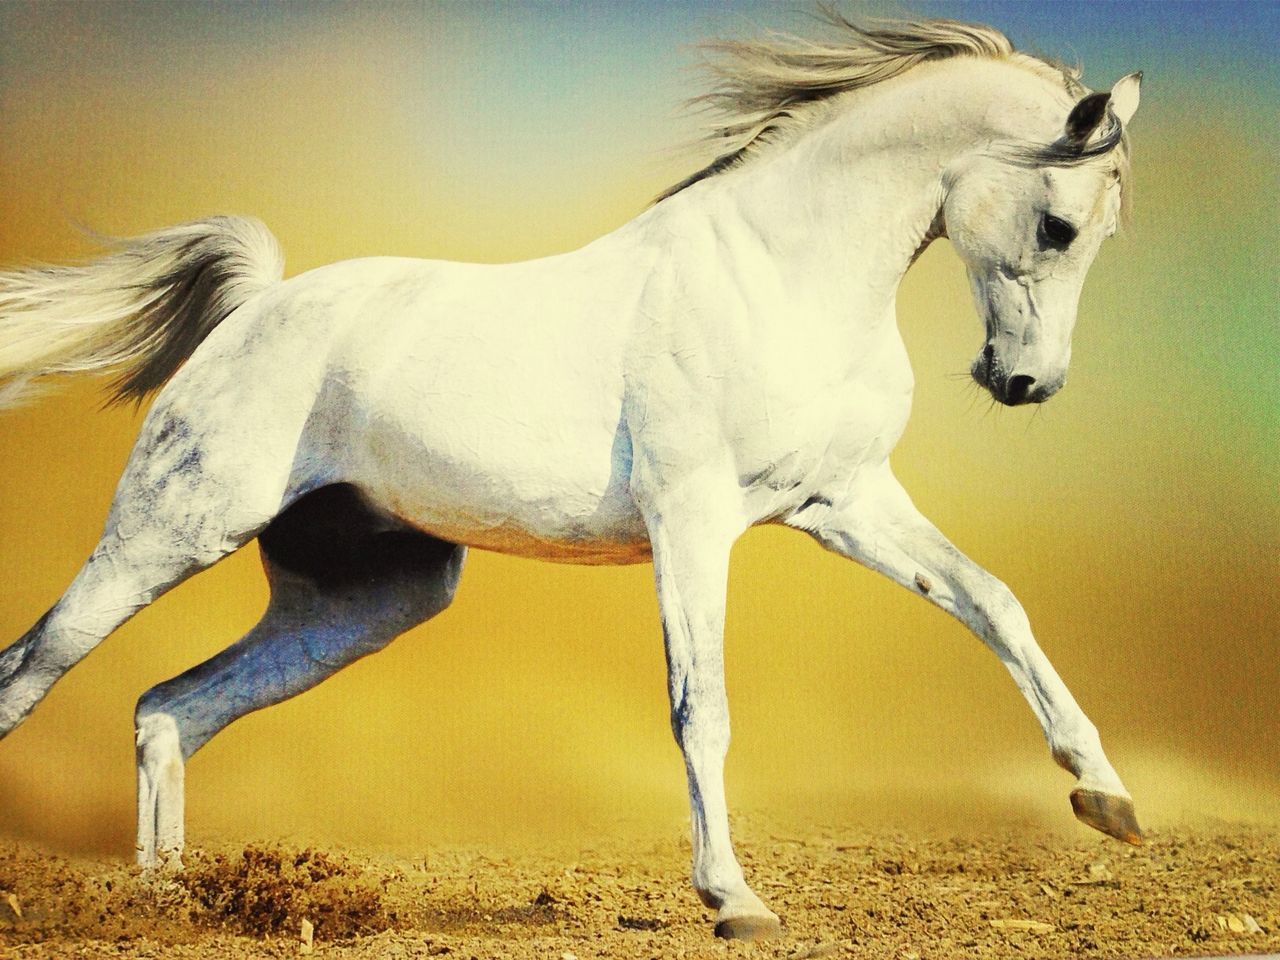 White horse in motion